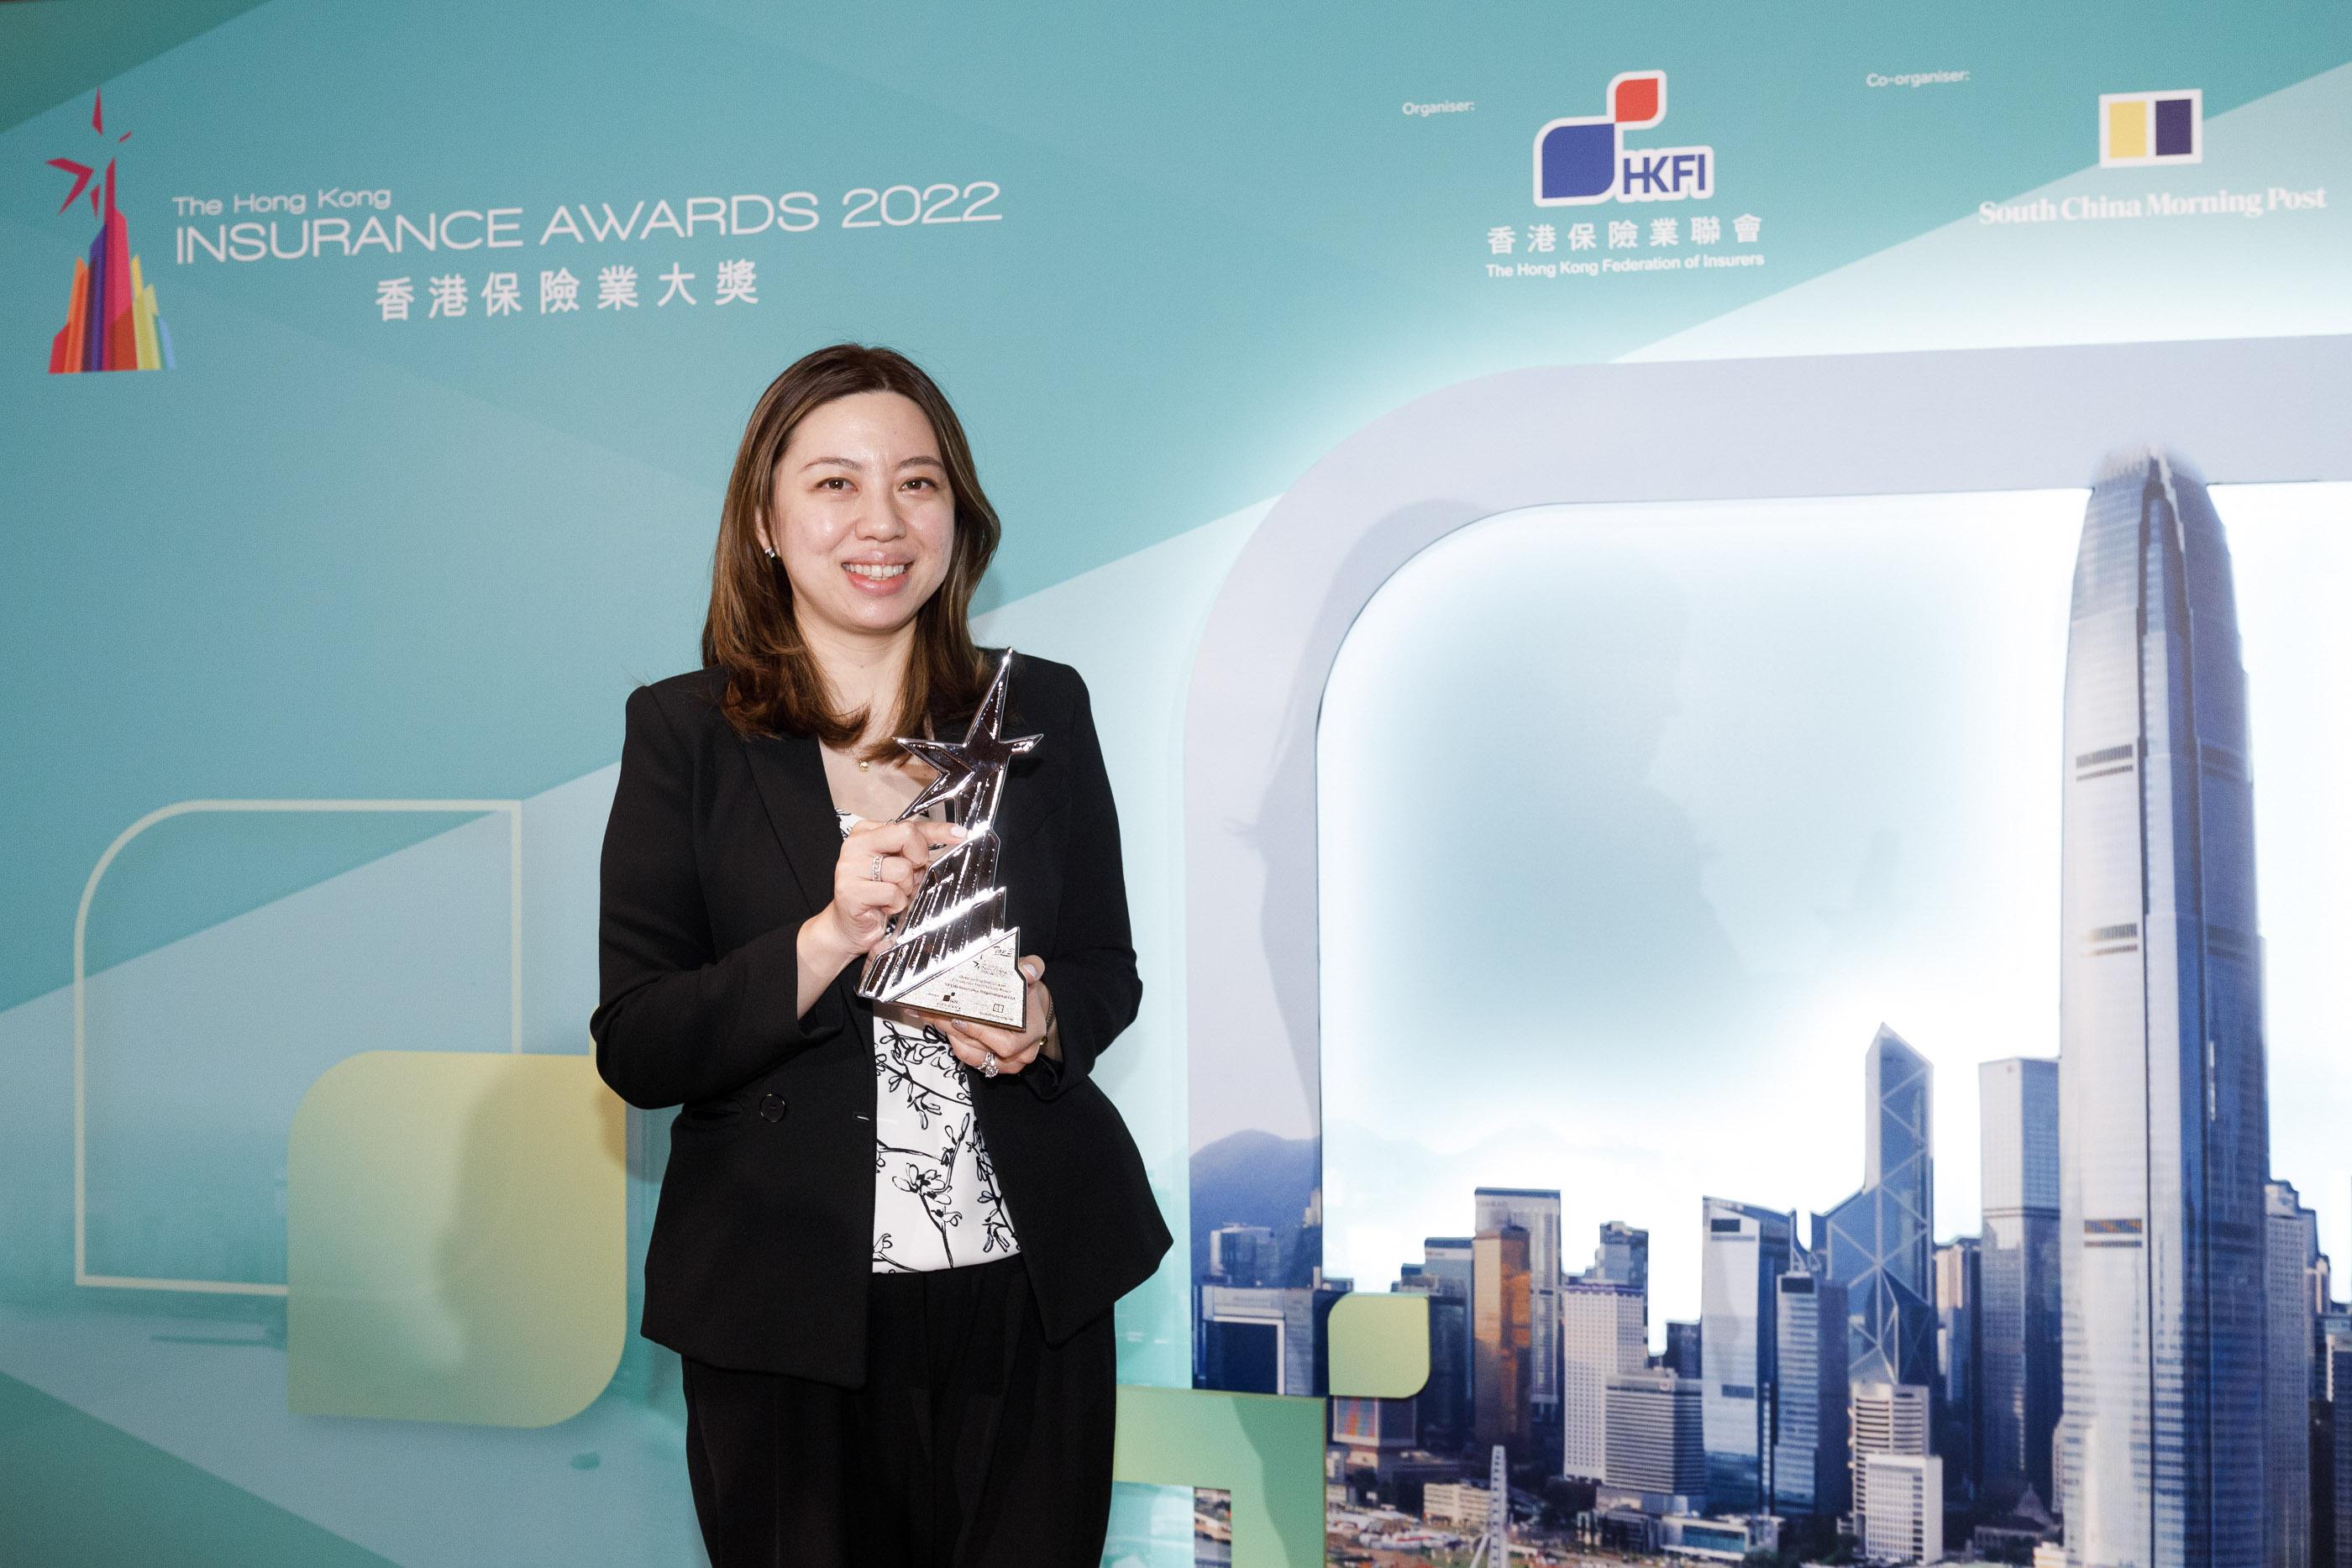 Ms. Jasmine Hui, Head of Product Strategy & Pricing at YF Life, receives the accolade of Top 3 Finalists in “Most Innovative Product/Service Award – Life Insurance (Health)” at The Hong Kong Insurance Awards 2022.